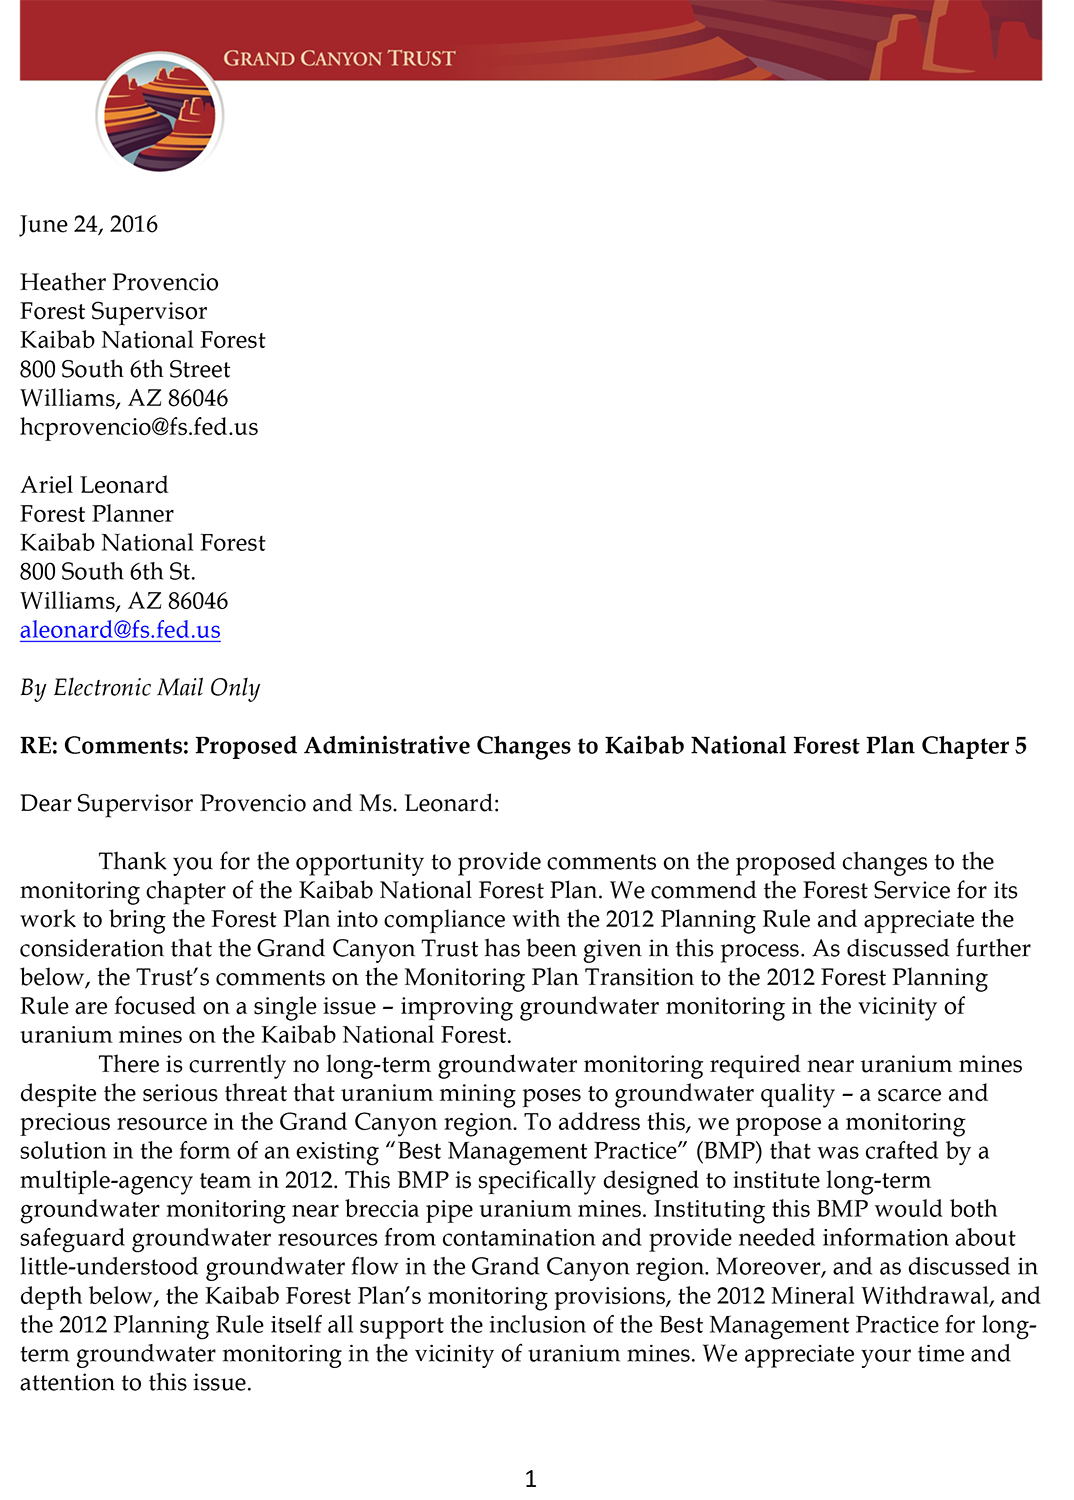 Kaibab National Forest plan change comments